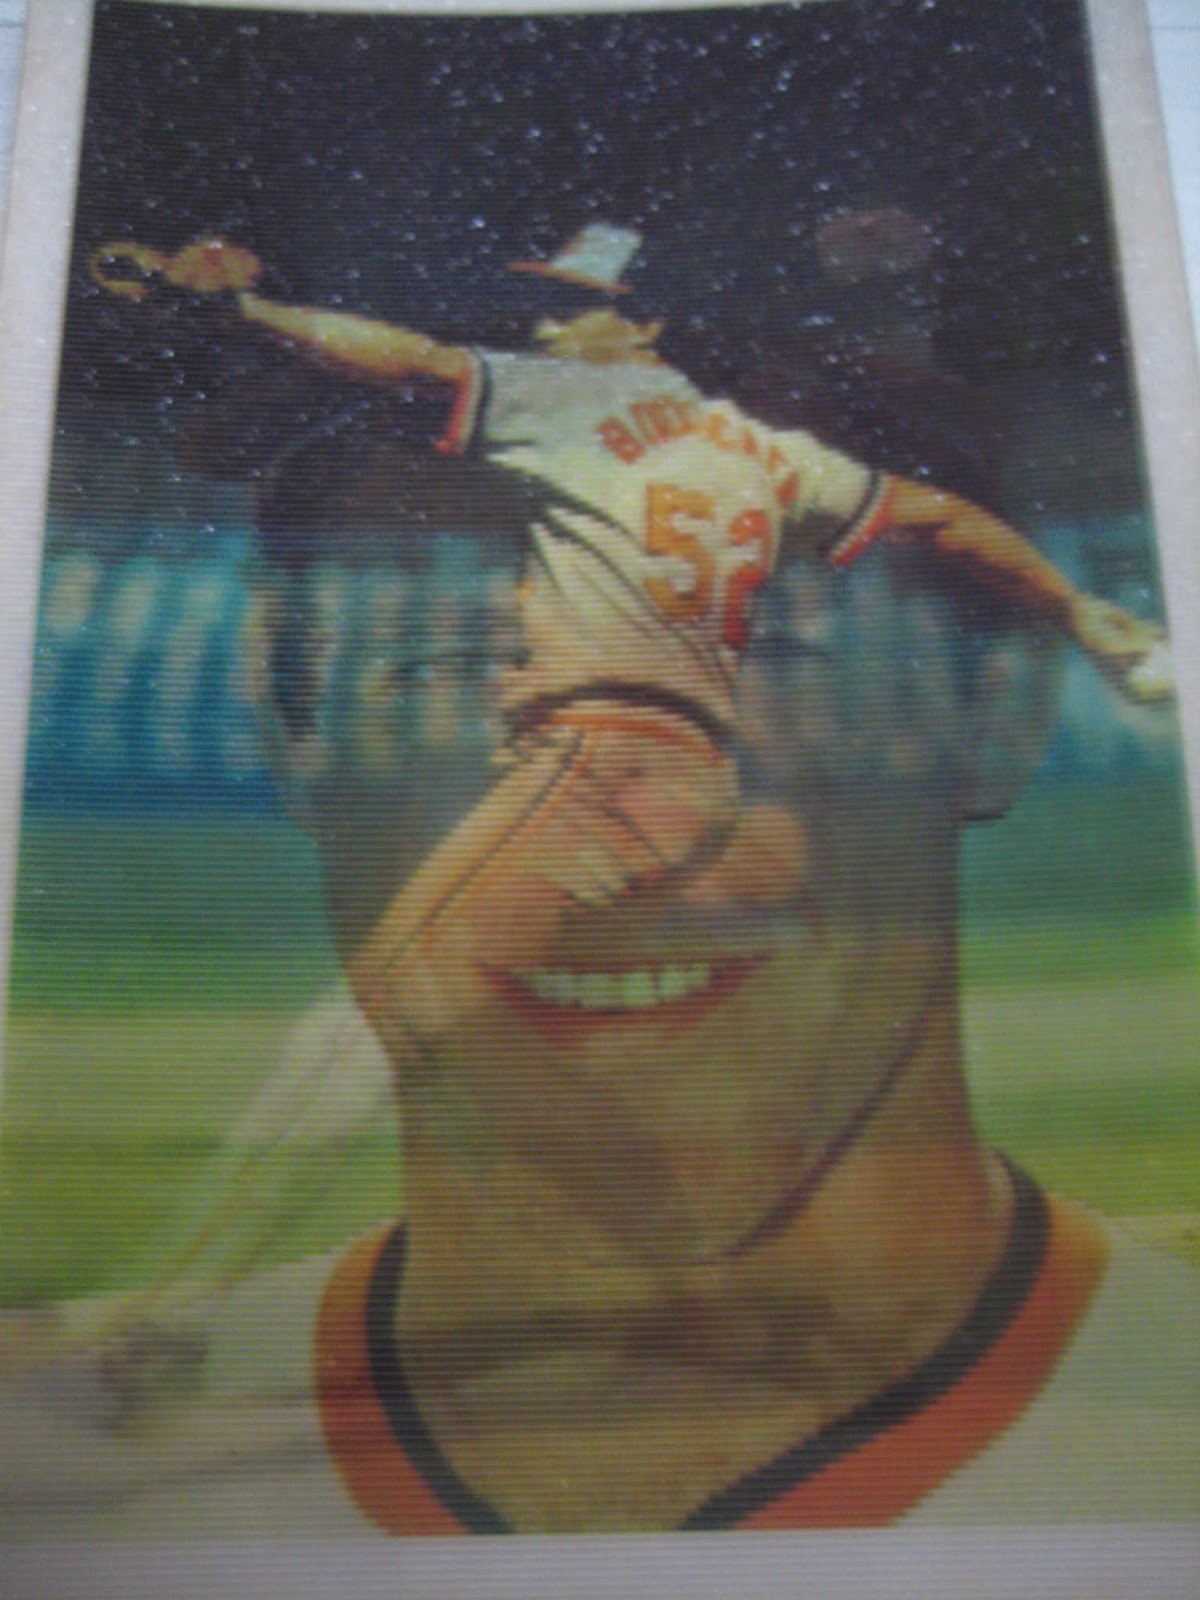 Baseball Cards Come to Life!: July 2014